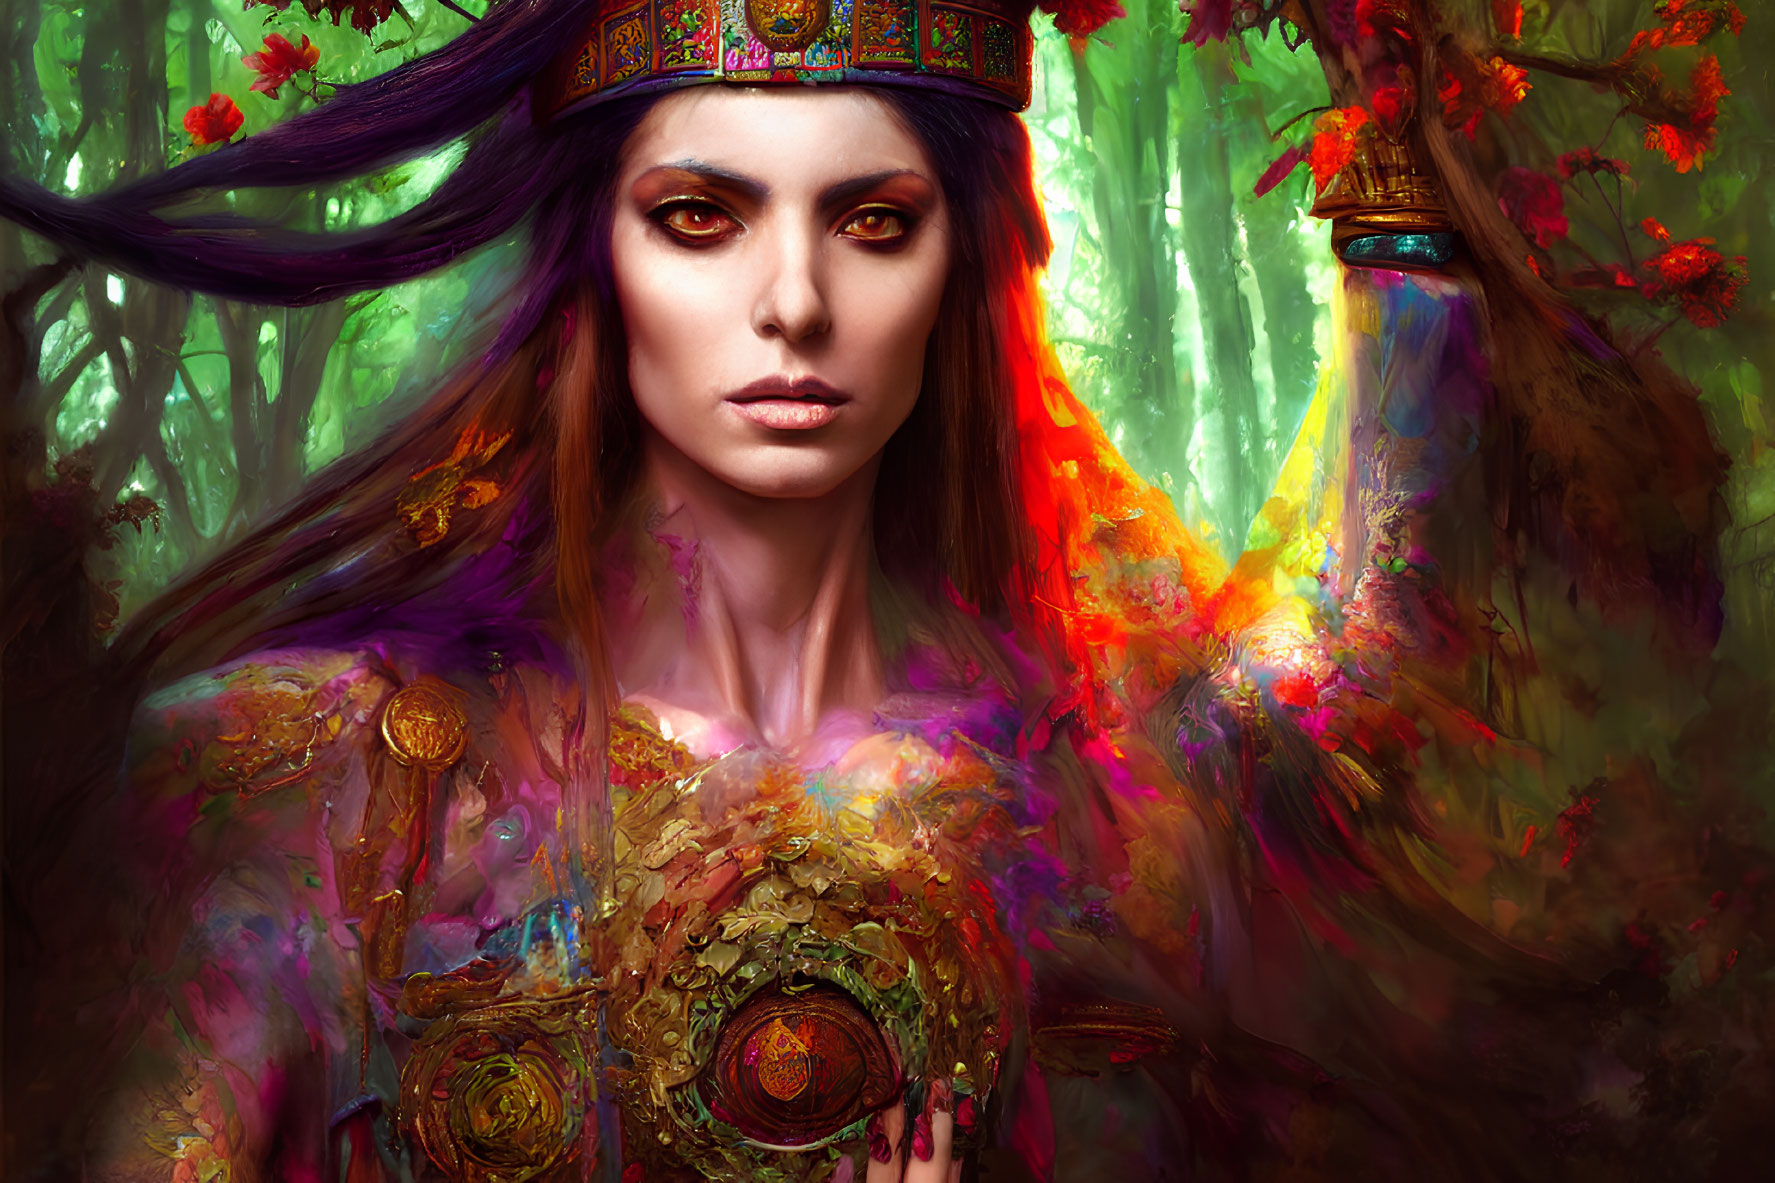 Fantasy portrait of woman with elaborate headdress in vibrant forest.